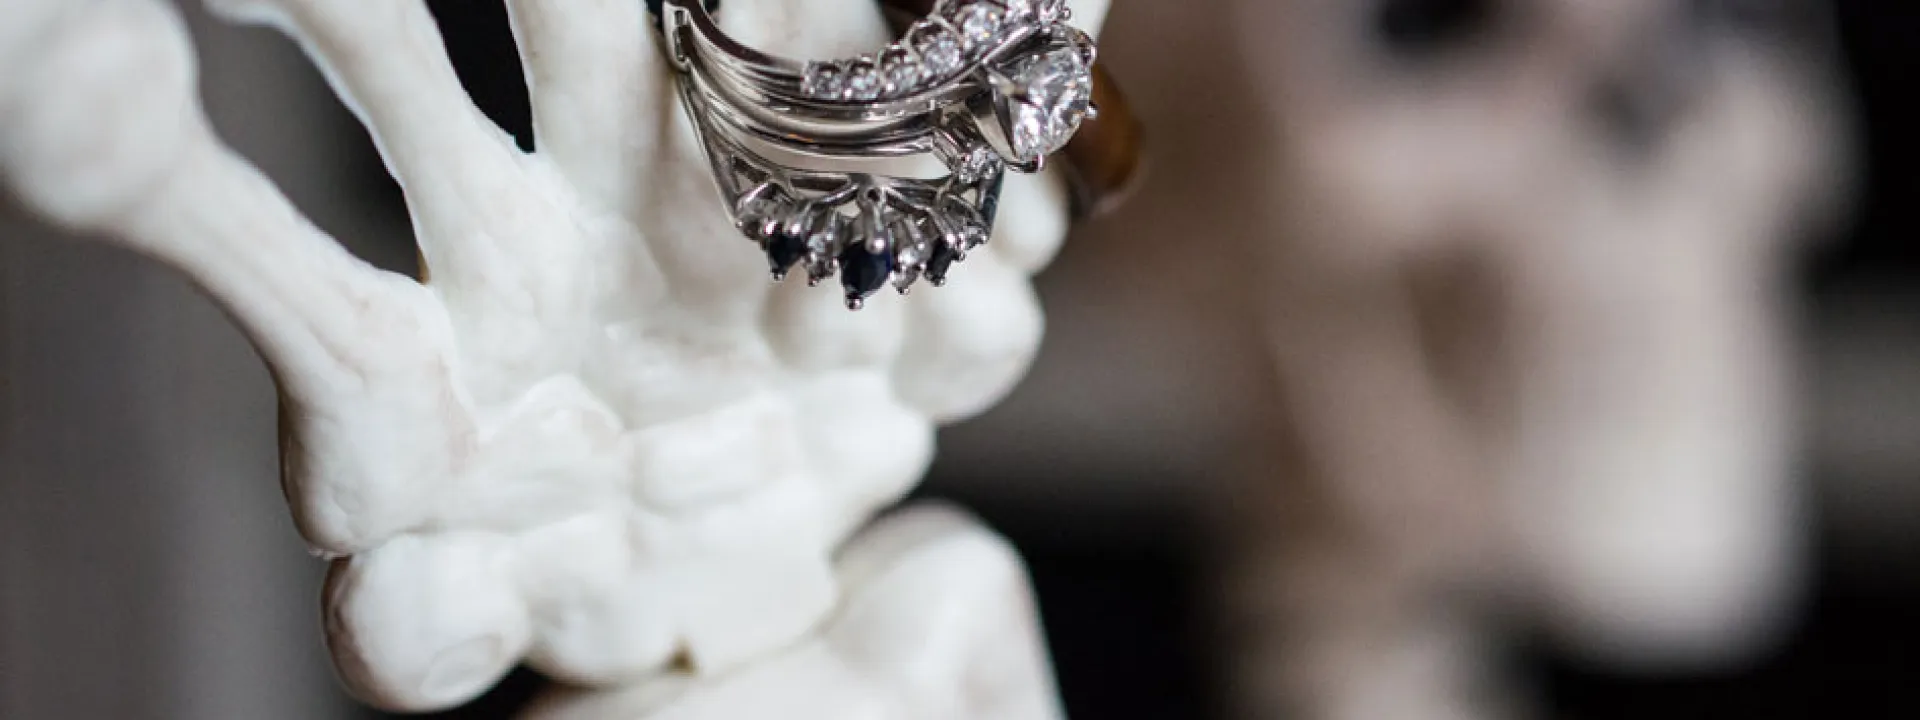 A skeleton displays the bride's rings at the entrance to Mayowood Stone Barn